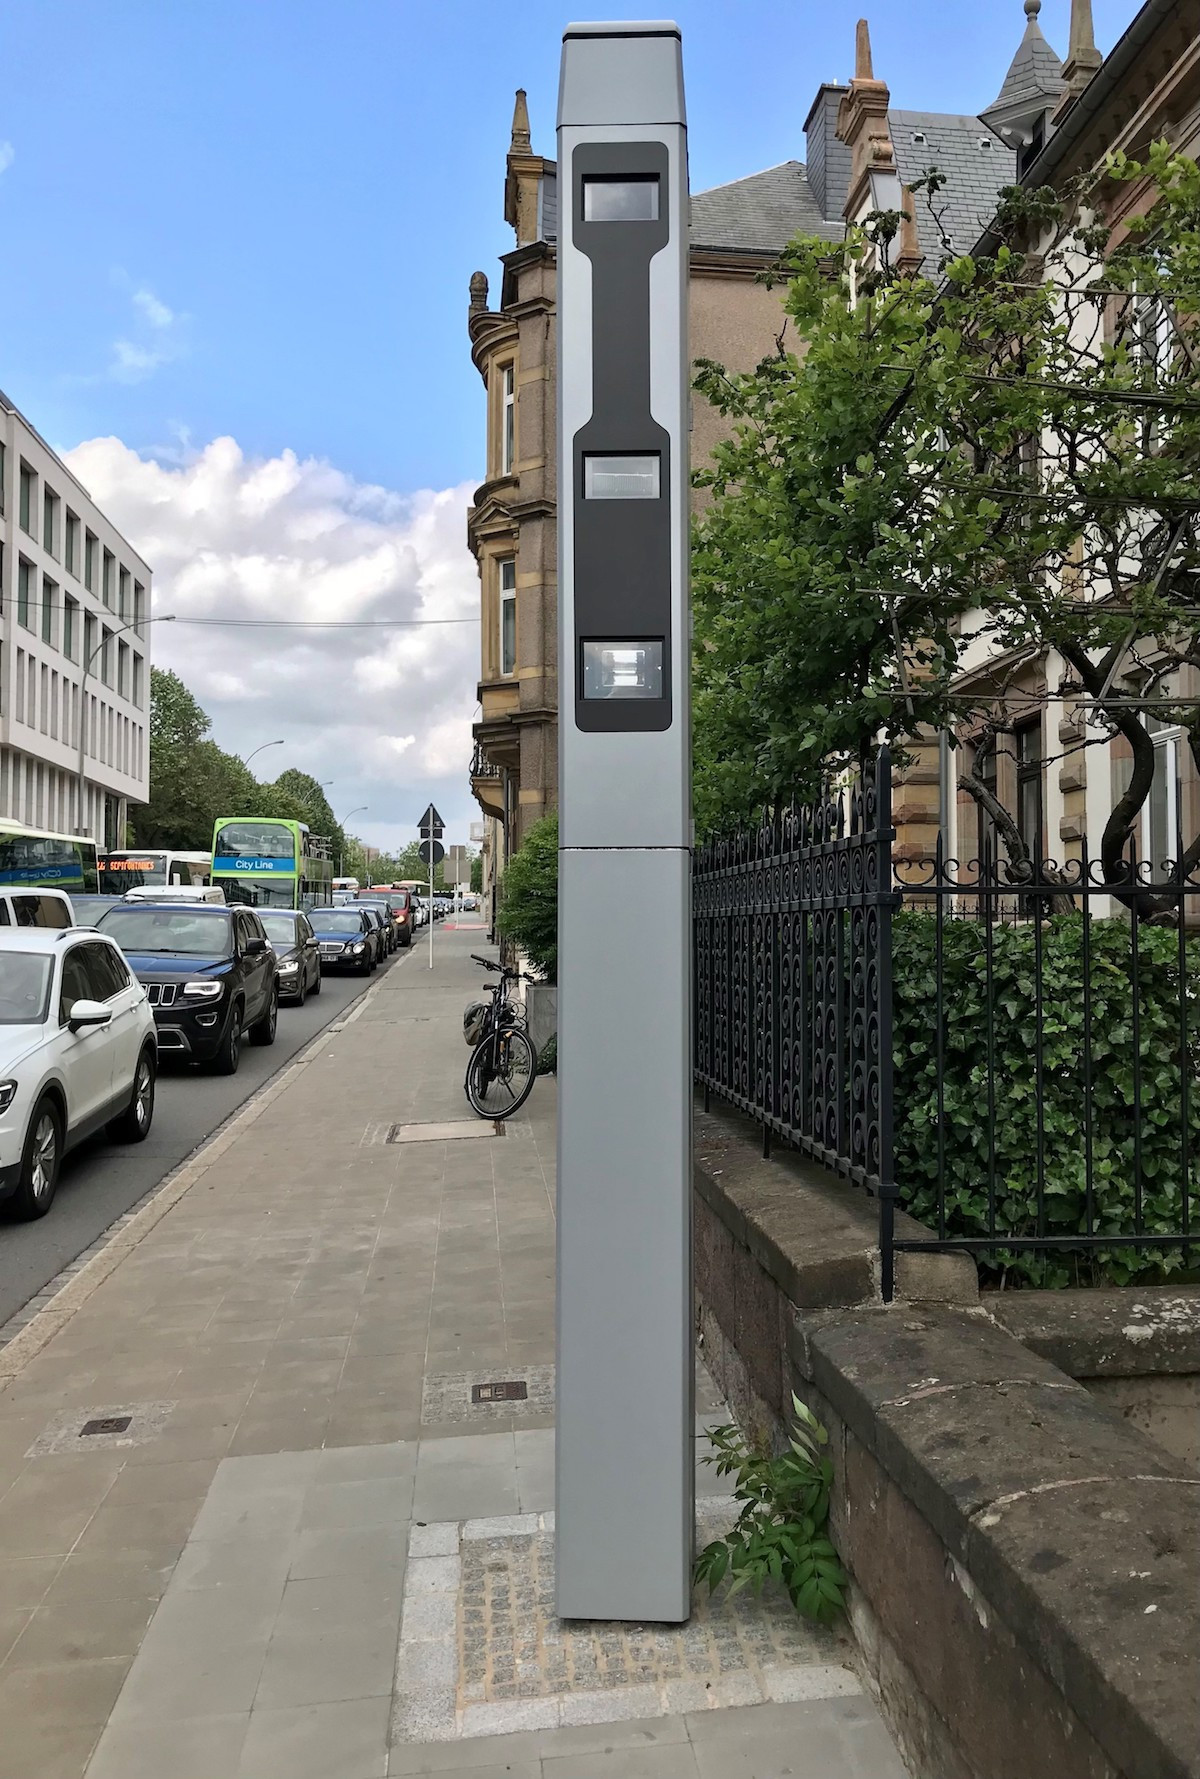 The automated red light camera entering service in Luxembourg City on 23 July 2021. Administration des ponts et chaussées